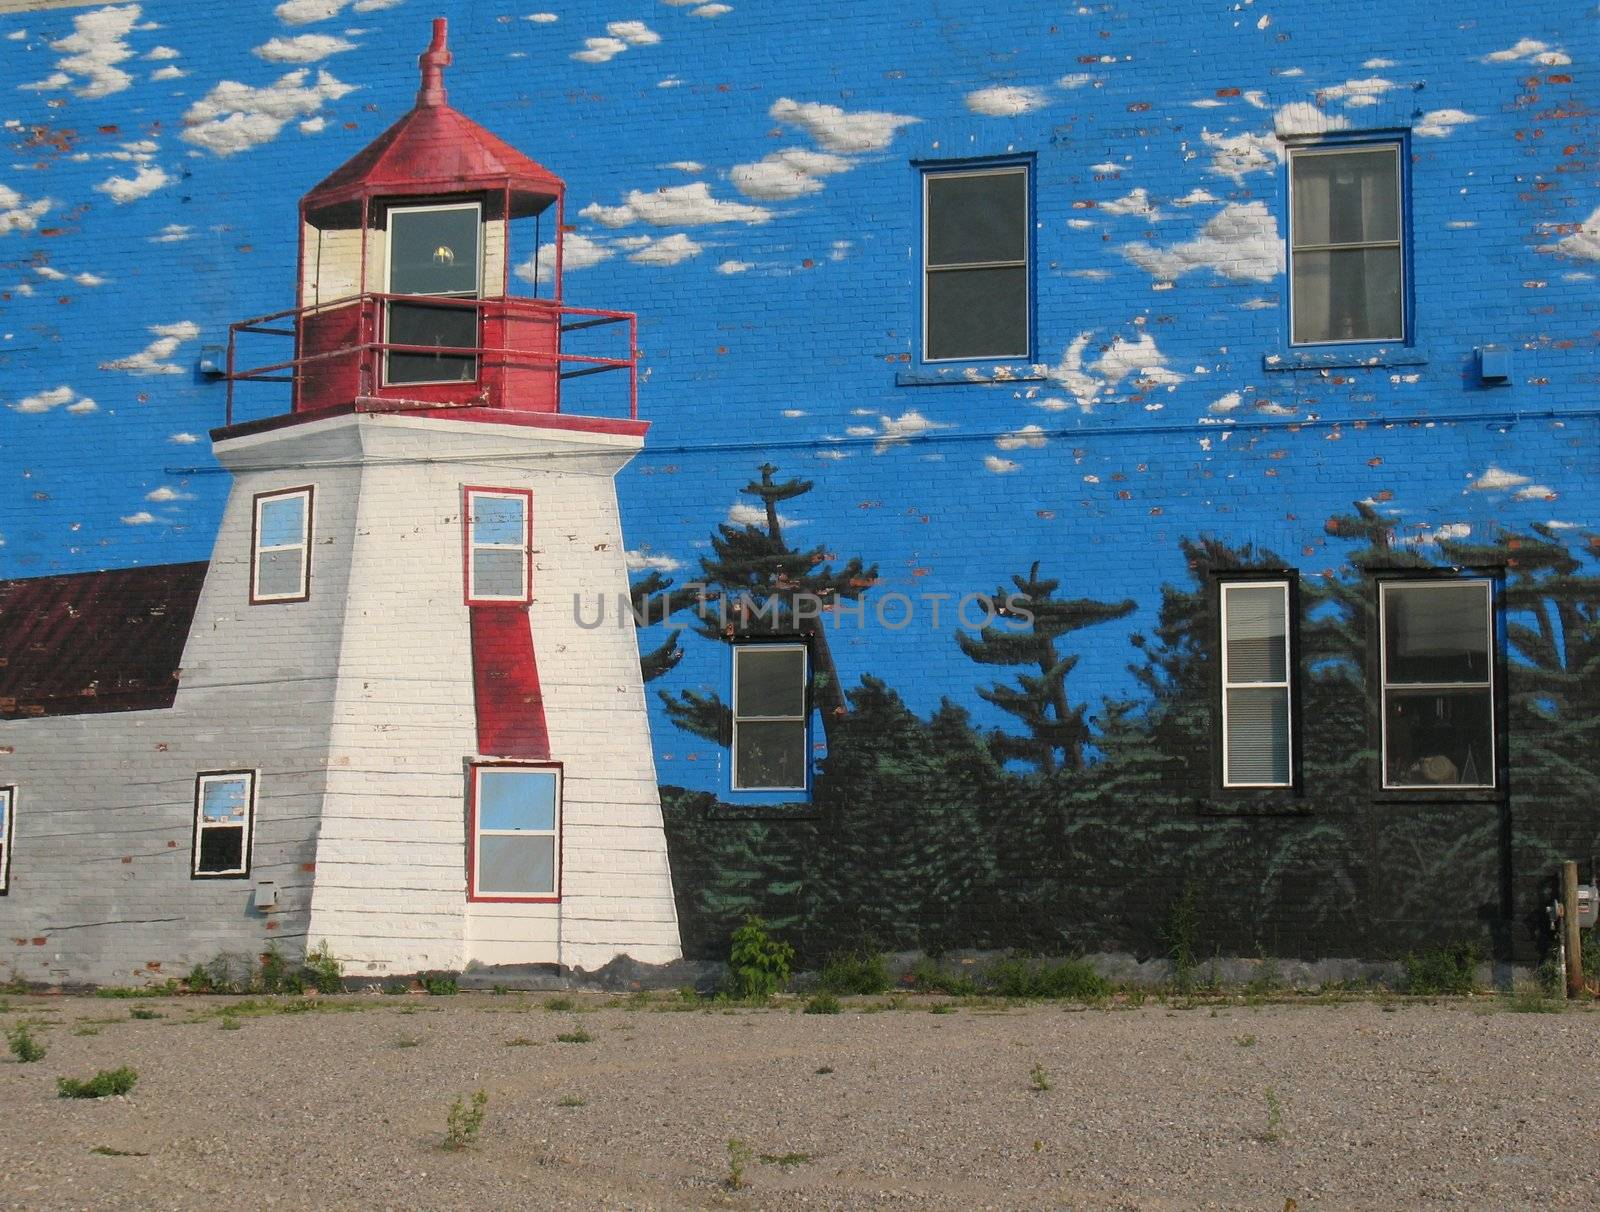 This image is on a mural of a lighthouse scene on the side of a building